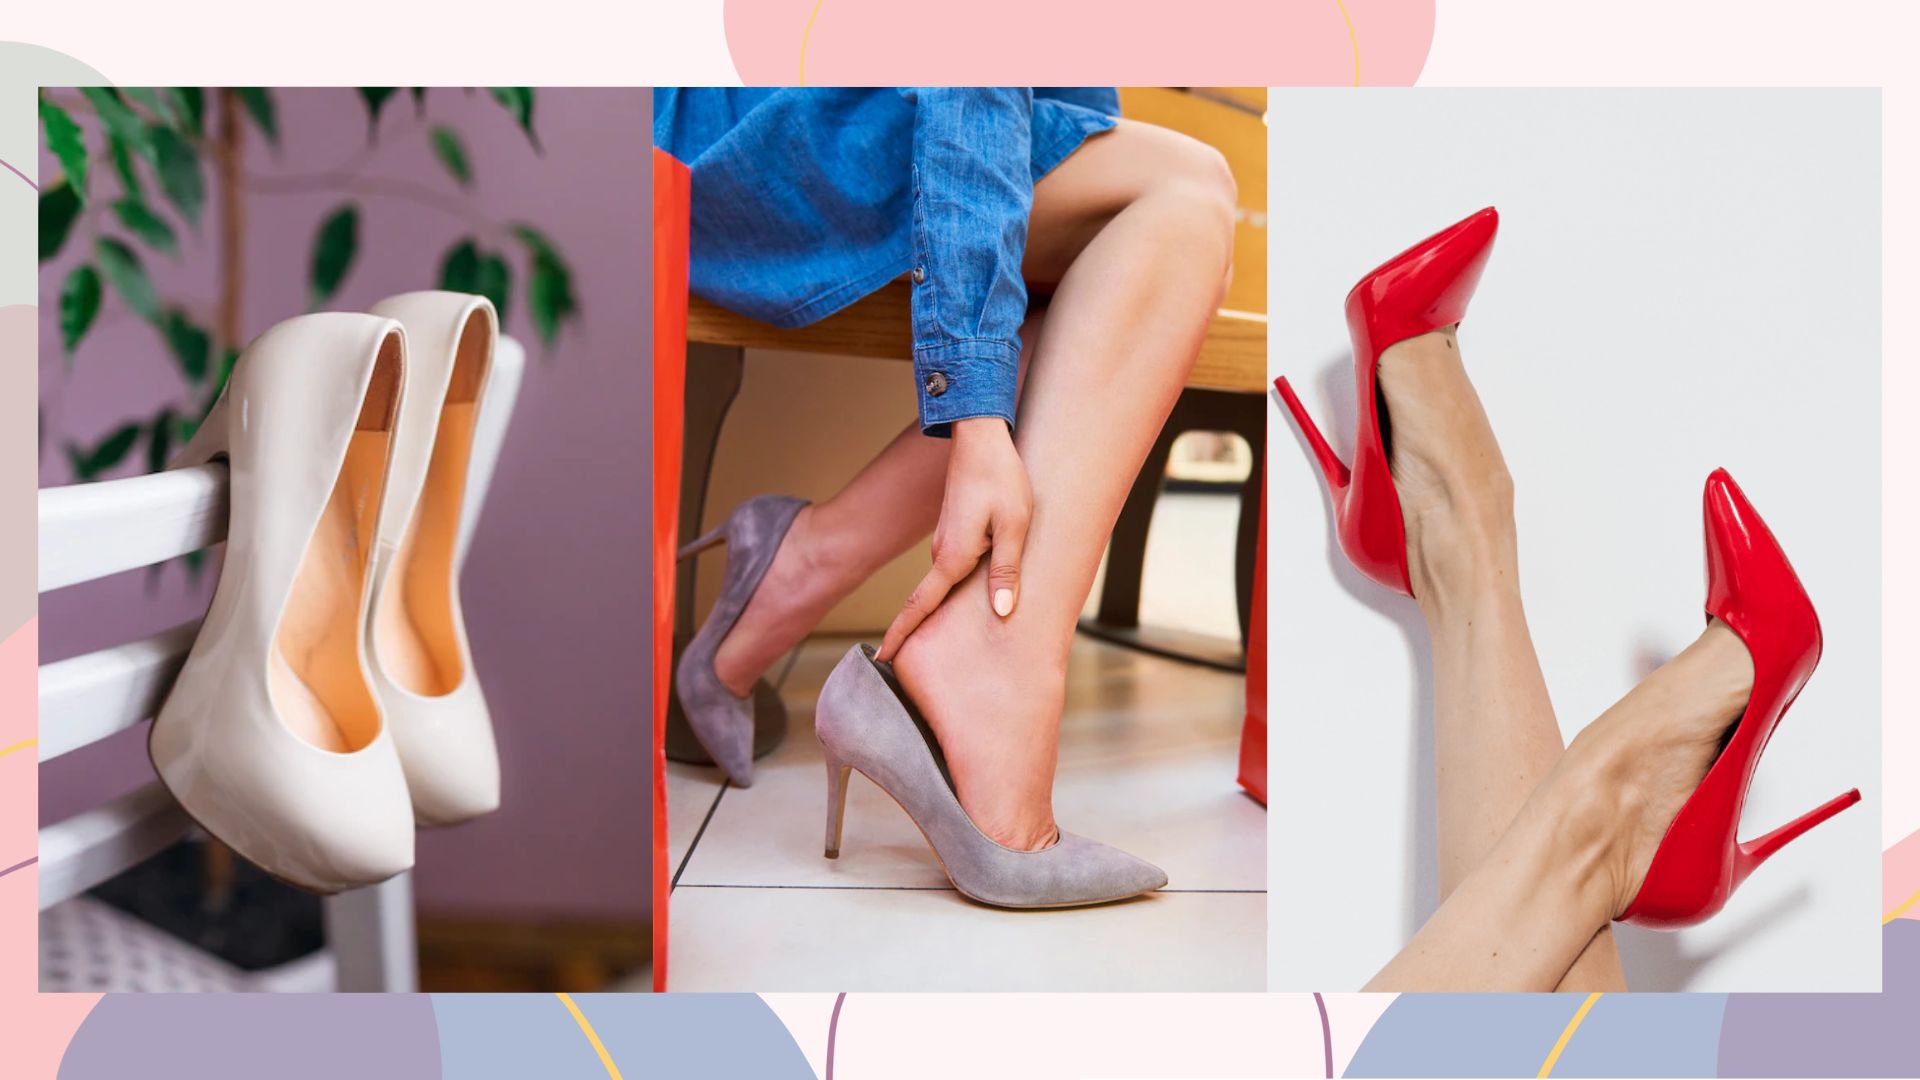 I Tried the Hack That's Supposed to Make Wearing High Heels Pain-Free